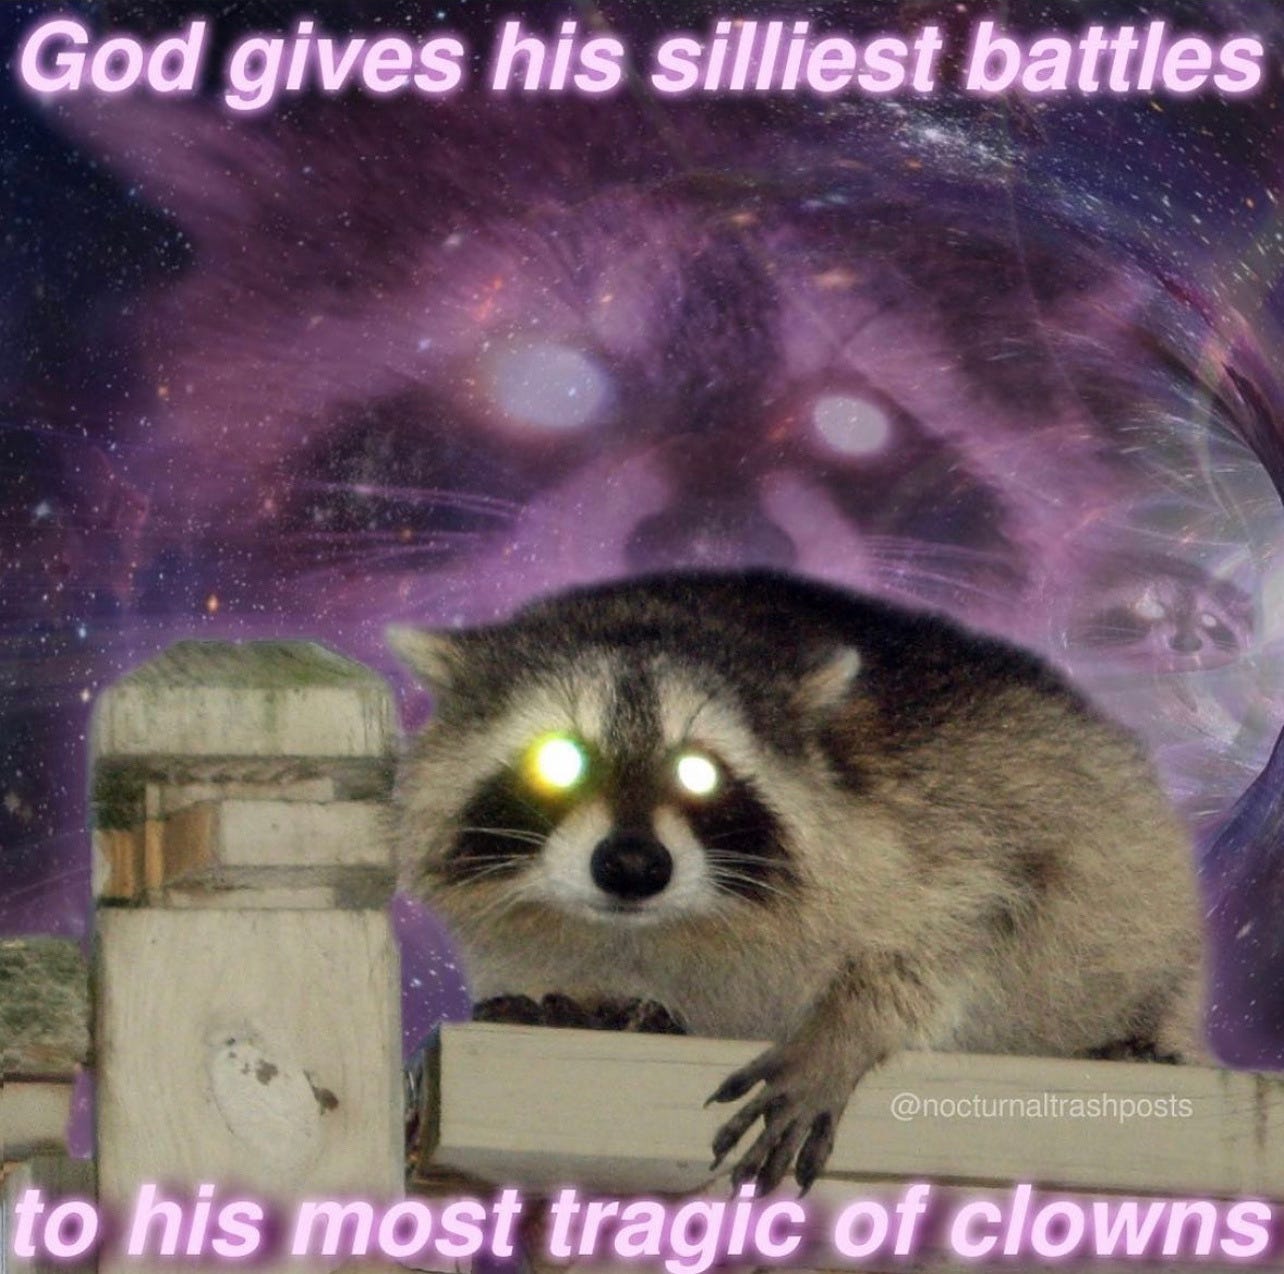 A raccoon on top of a wooden fence with shining eyes and transparent versions of him in the starry sky getting sucked into a vortex in the background, with a caption reading "God gives his silliest battles to his most tragic of clowns." A watermark reads "@nocturnaltrashposts".